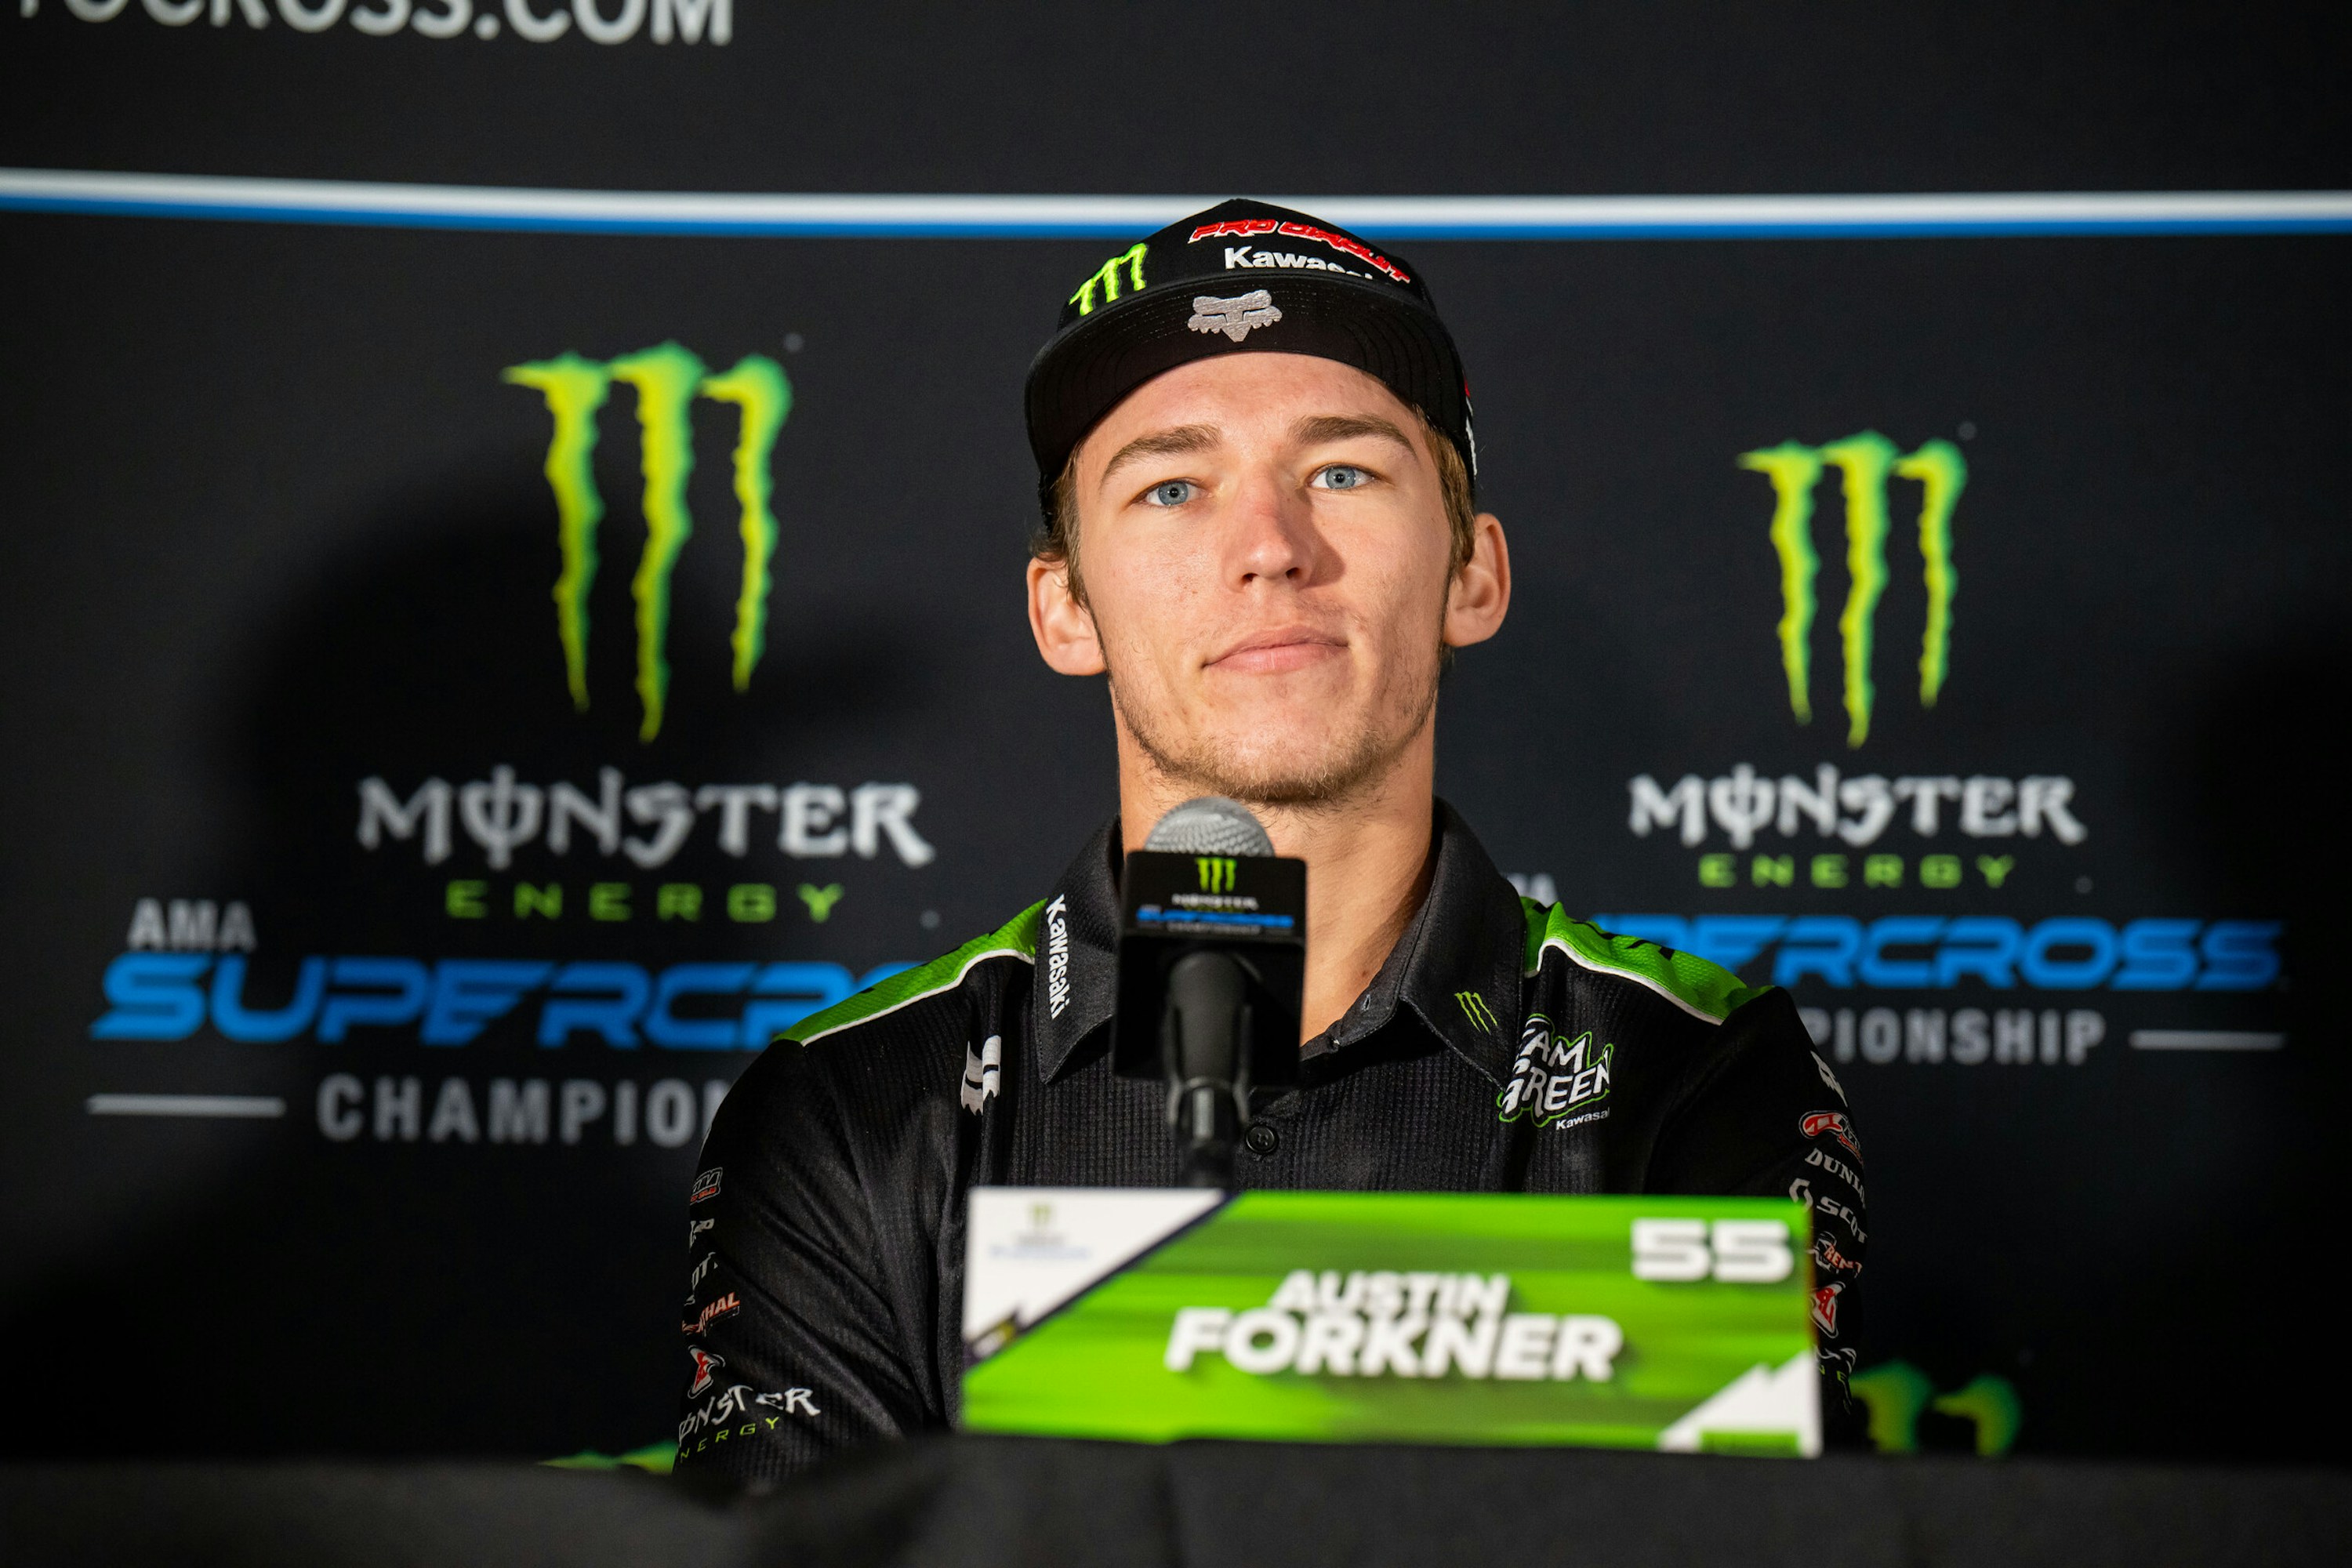 Austin Forkner Knee Injury Update, Out For Two SMX Rounds Racer X